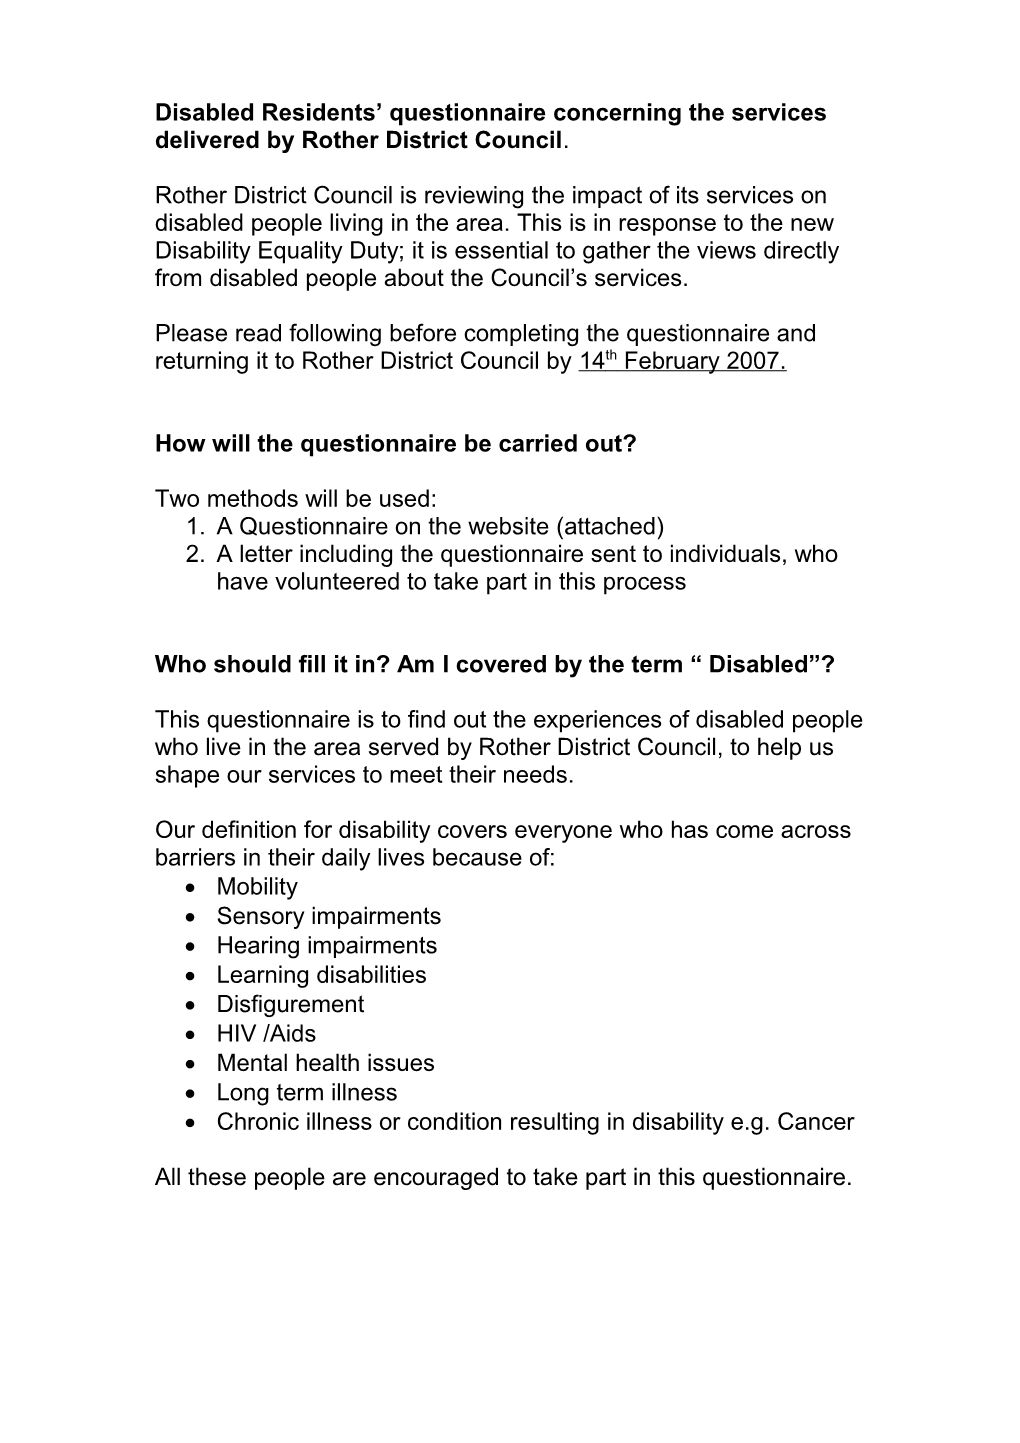 Questionnaire for Disabled Residents Concerning the Services Delivered by Rother District